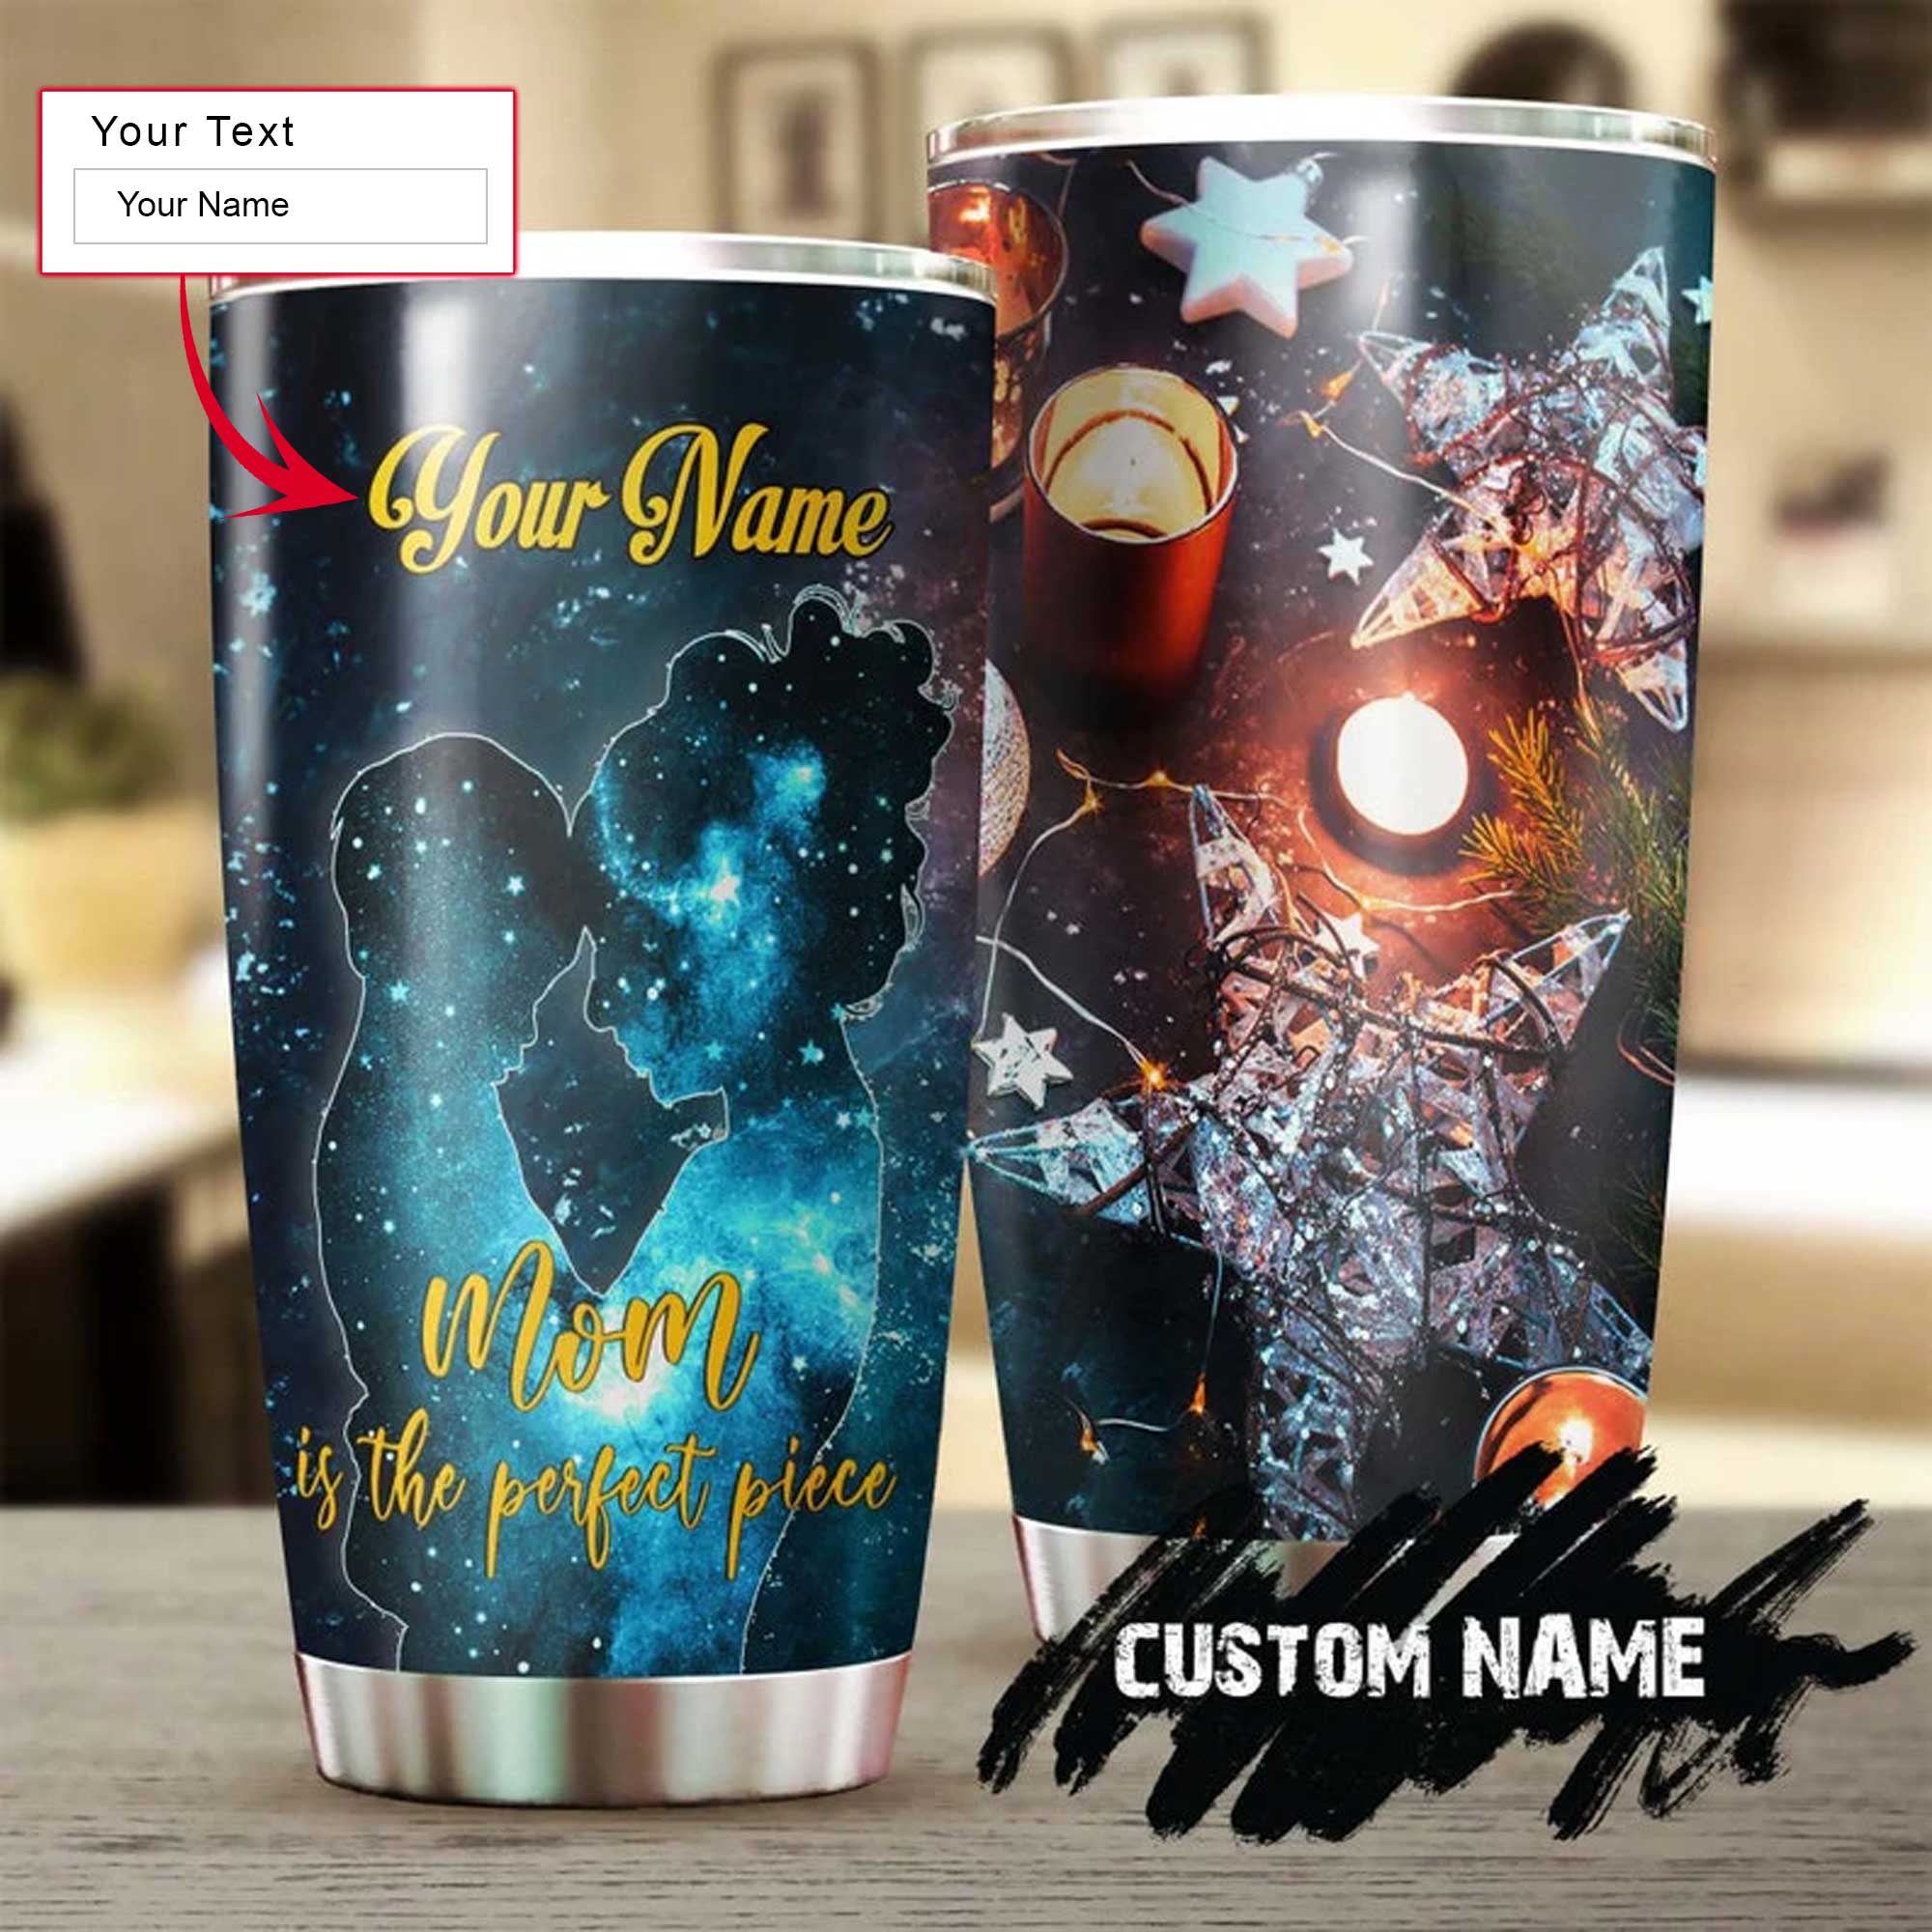 Personalized Mother's Day Gift Tumbler - Custom Gift For Mother's Day, Presents for Mom - Mom Is The Perfect Piece In This Galaxy Tumbler